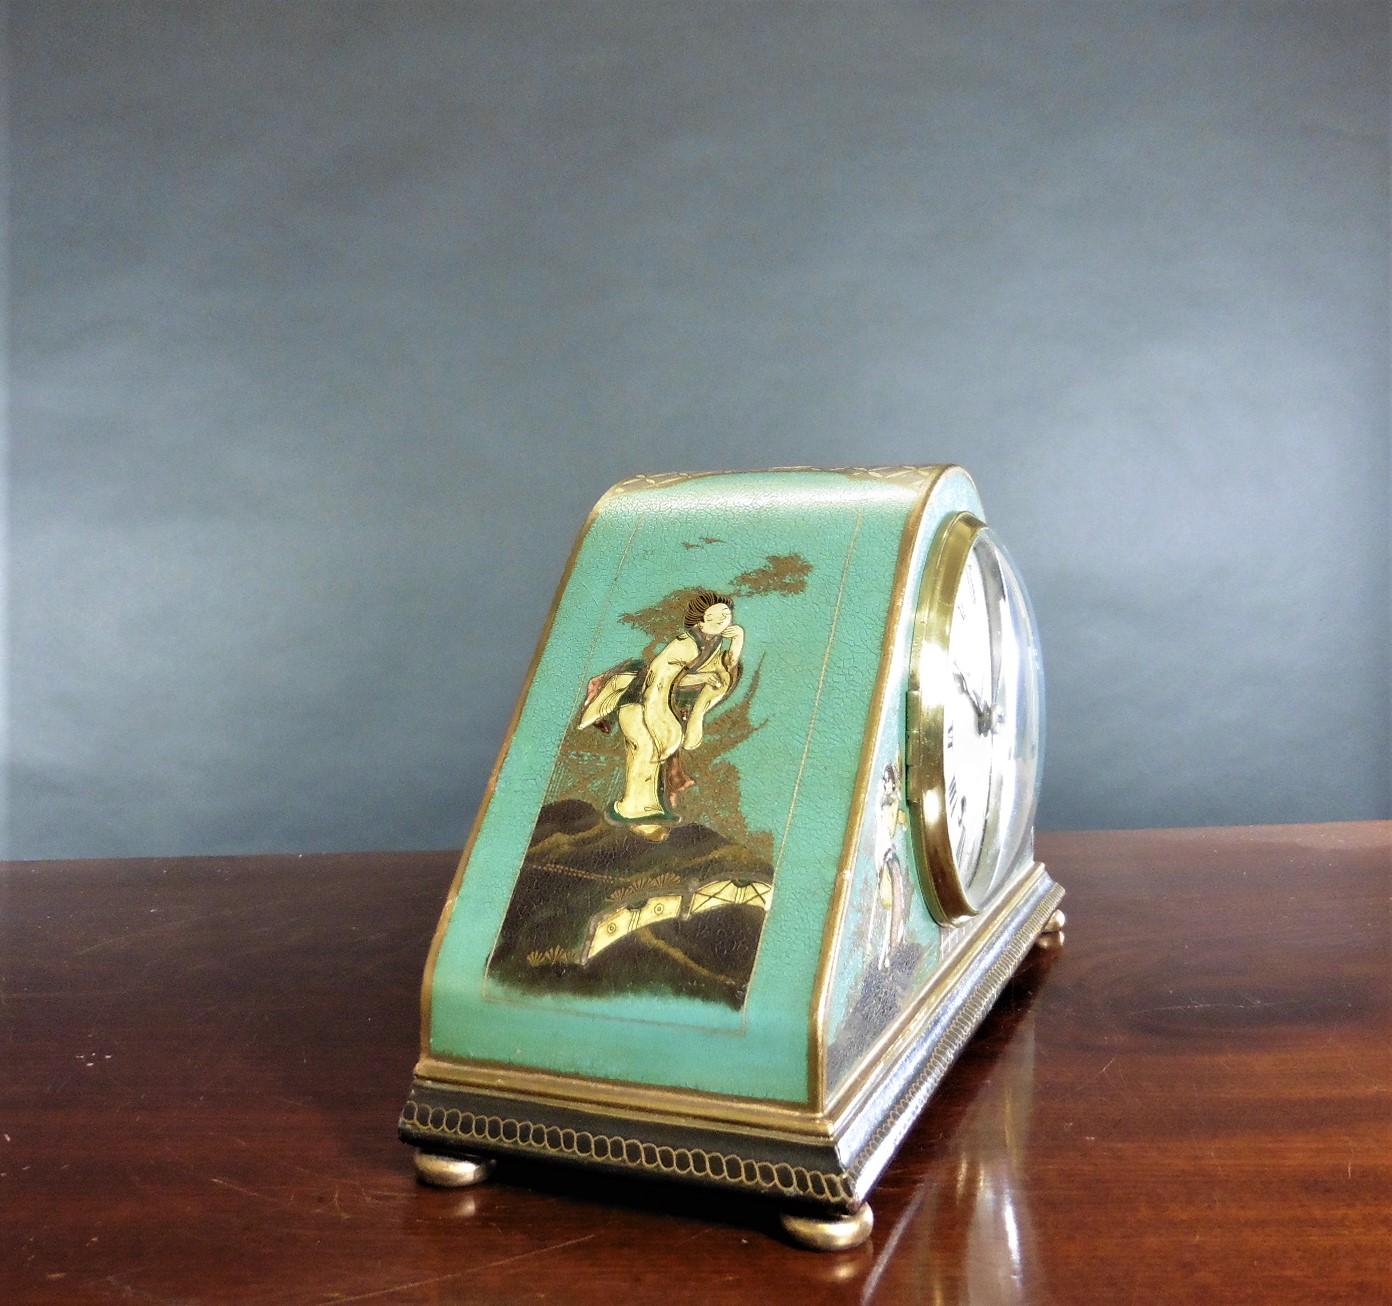 Edwardian Chinoiserie decorated mantel clock, Thornhill, London.

Shaped case with raised Chinoiserie decoration on a turquoise ground resting on a stepped plinth with four brass bun feet.

Silvered dial with Roman numerals, original ‘blued’